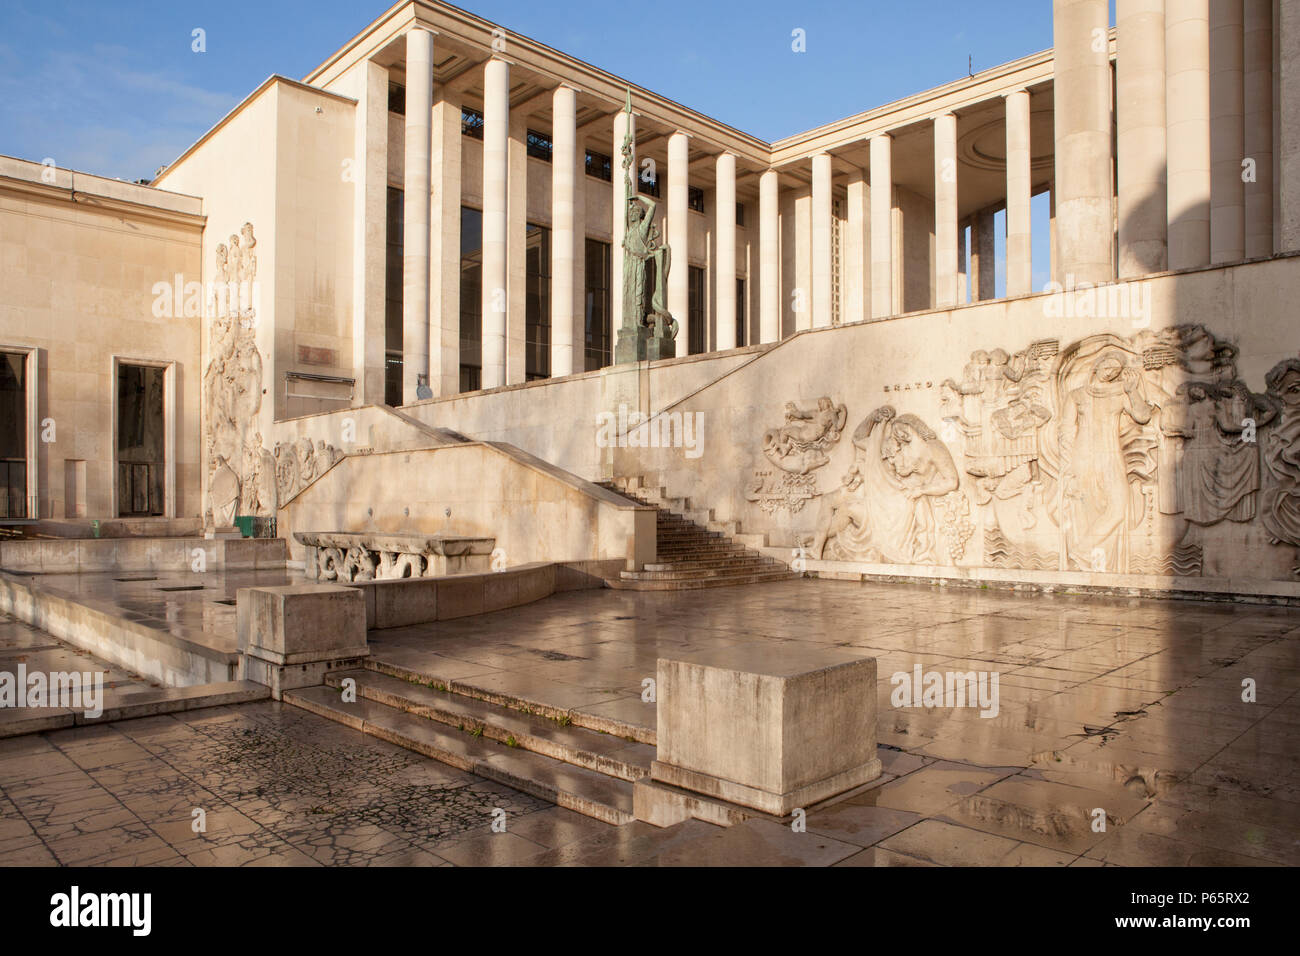 The 1937 Art Deco design of the Palais De Tokyo which houses the Museum of Modern Art in Paris, France Stock Photo